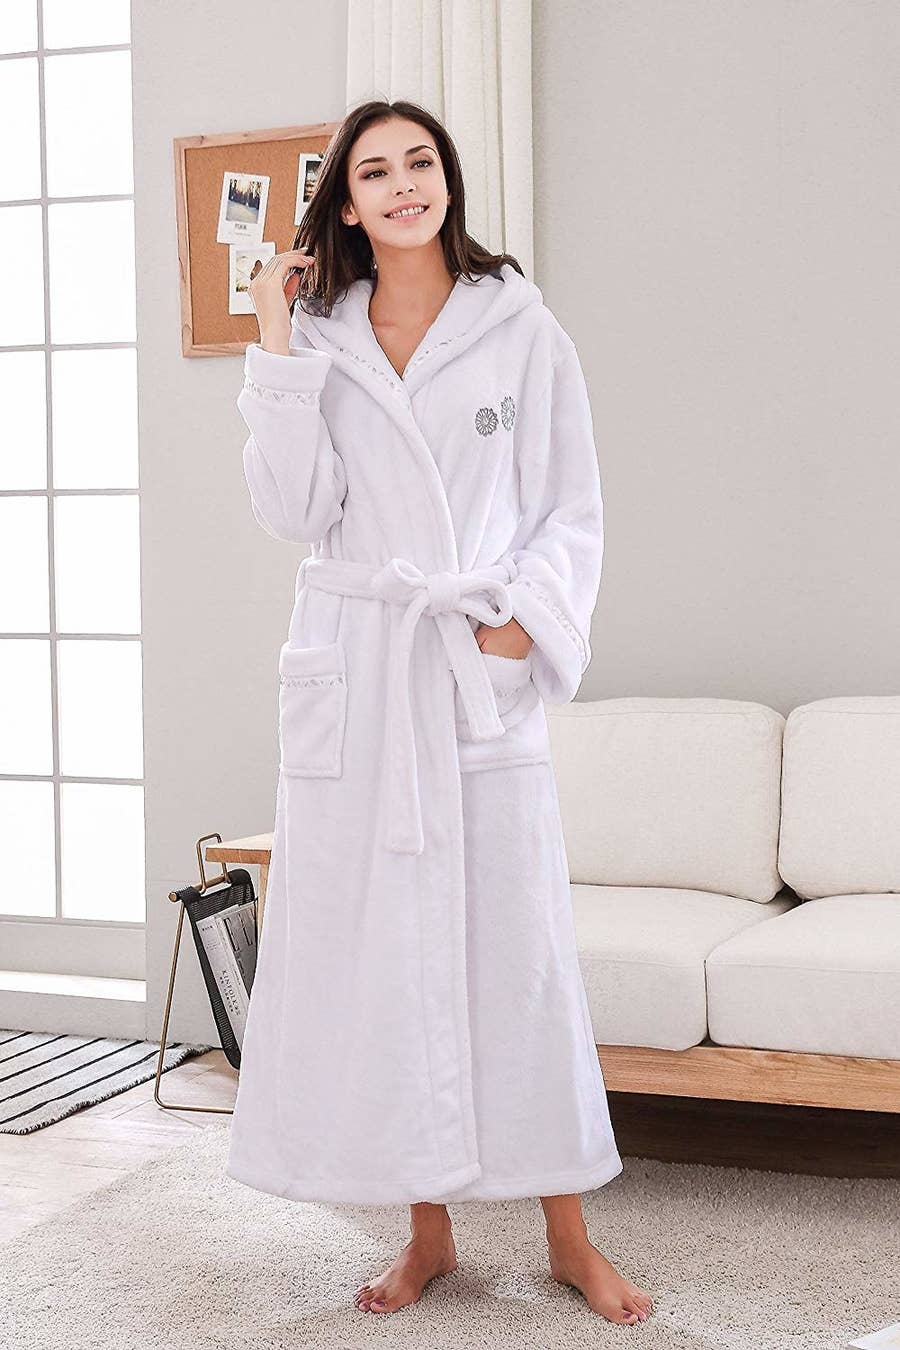 Your staycation essentials: comfortable robes, room service, and a bed that  feels like a cloud. Experience the perfect blend of comfort a